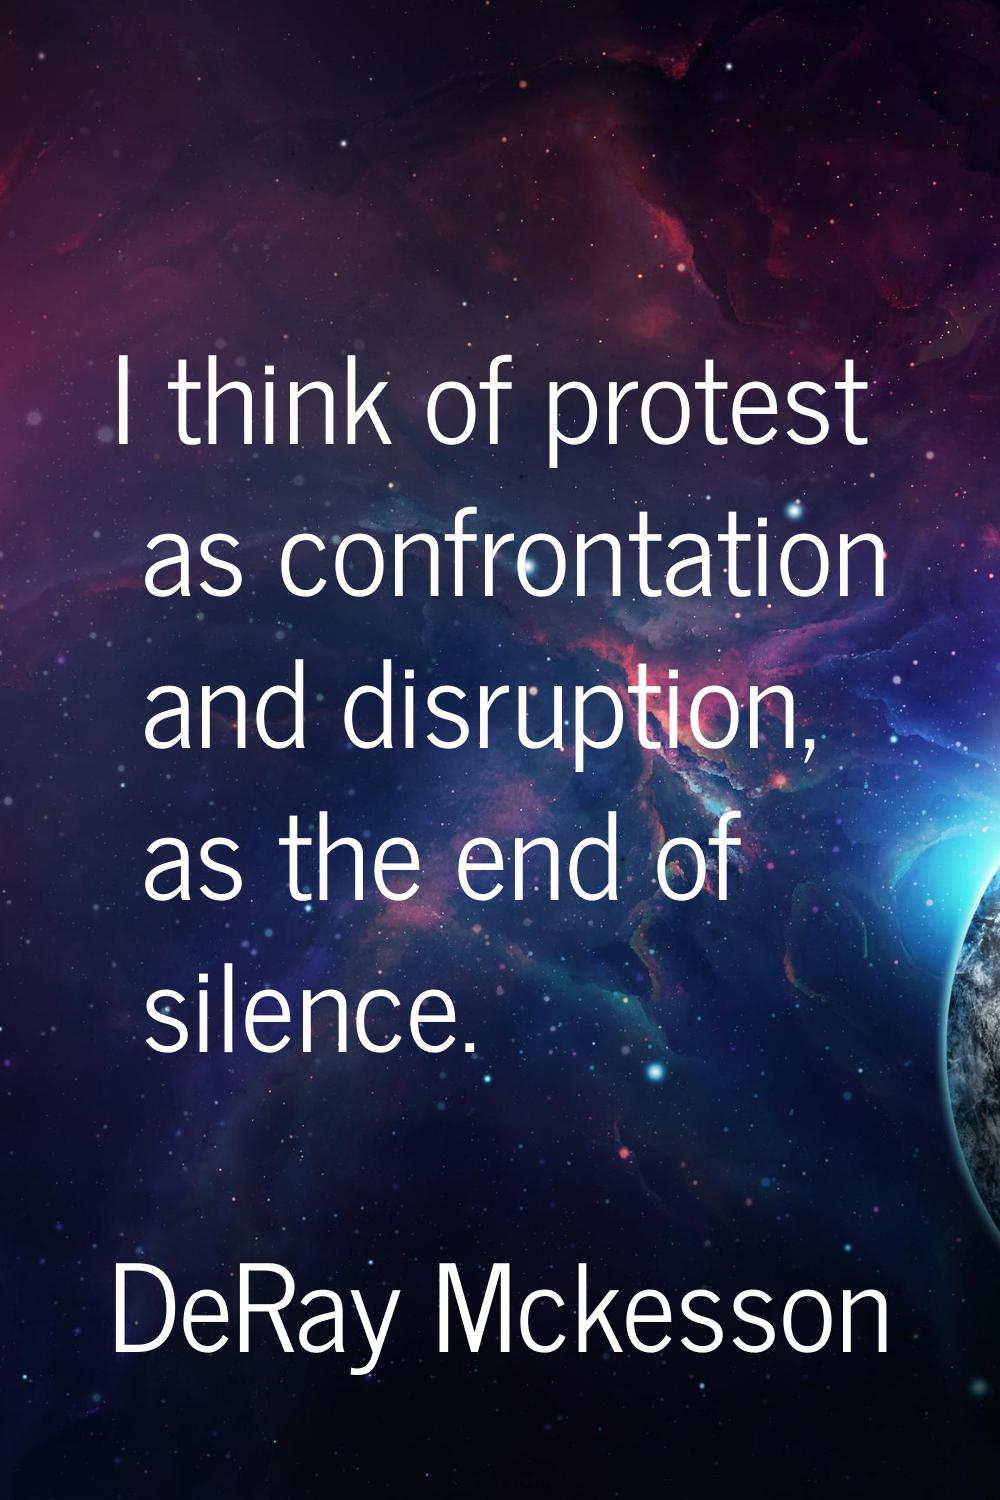 I think of protest as confrontation and disruption, as the end of silence.